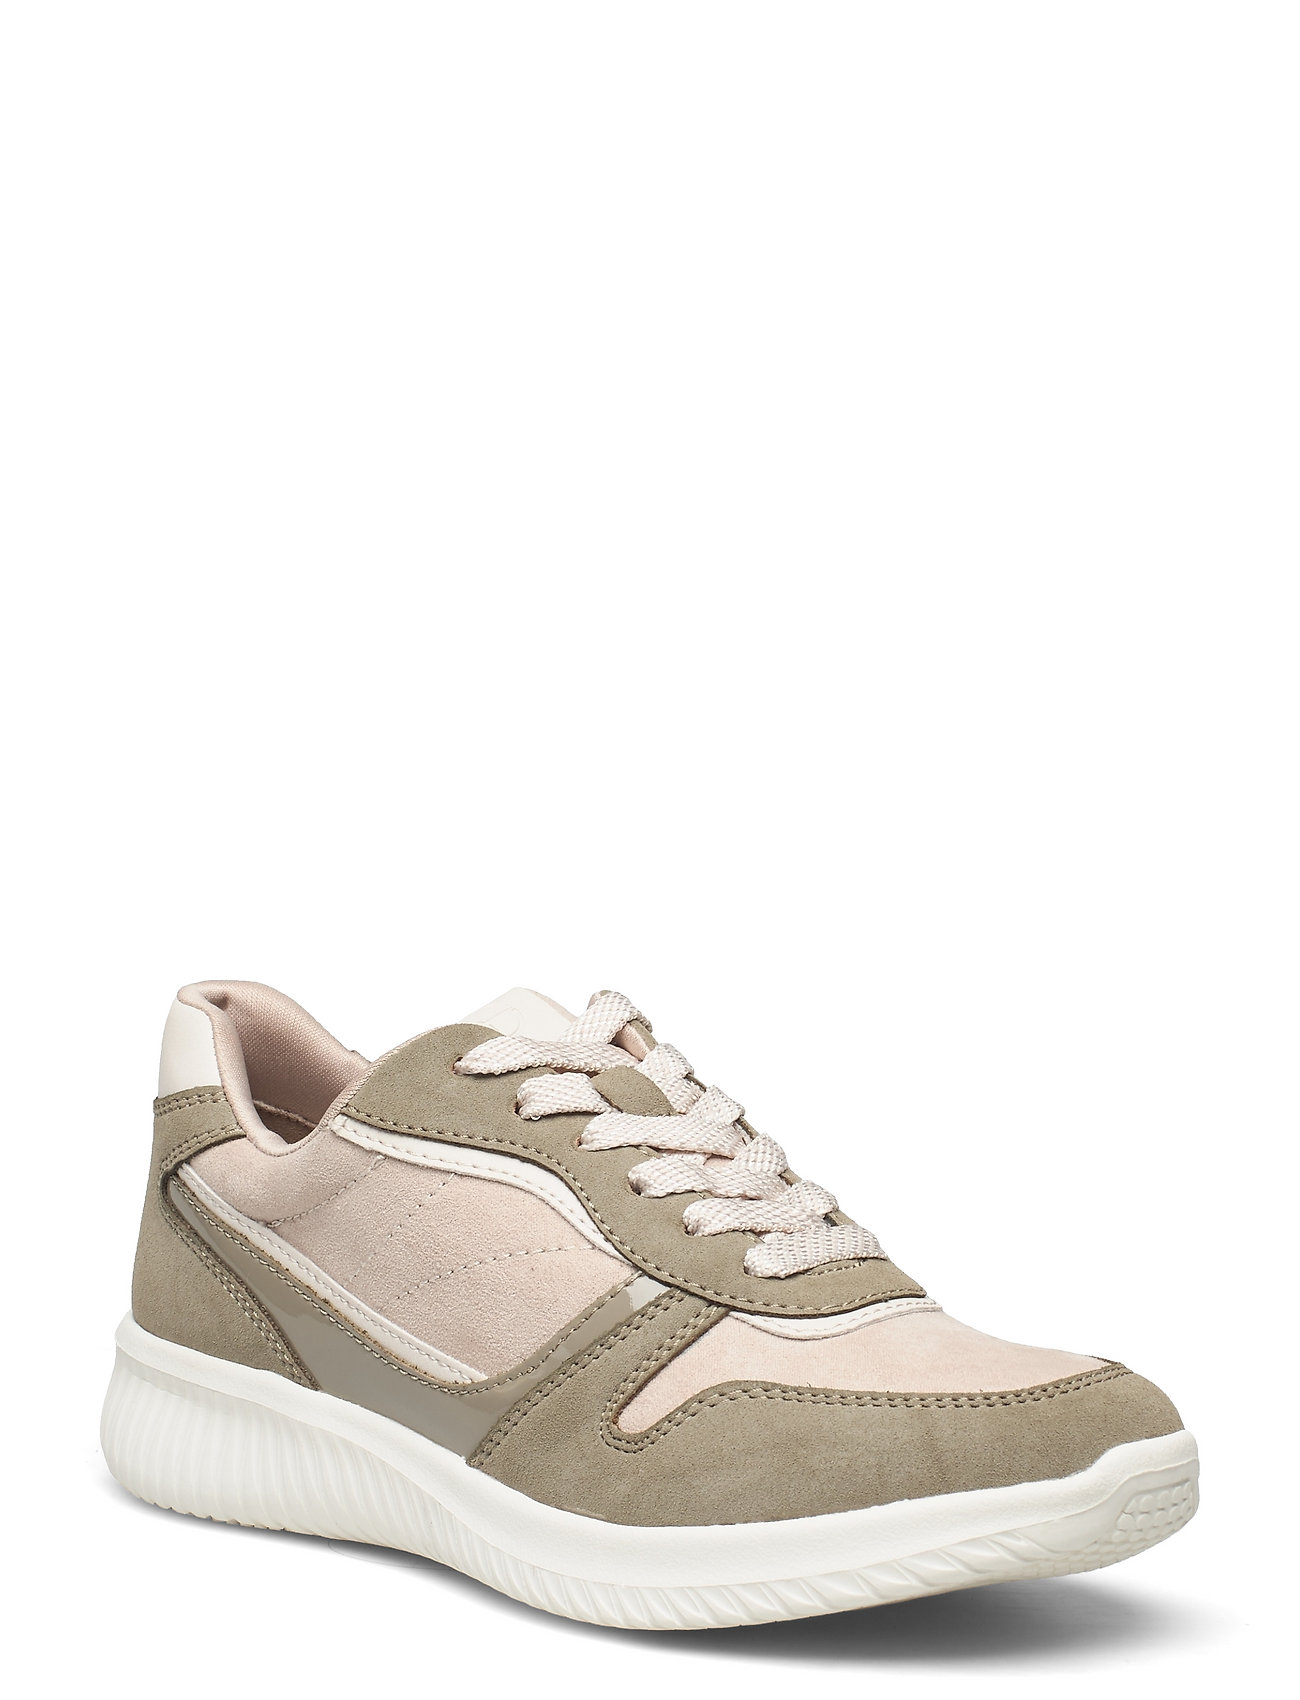 Tamaris Woms Lace-up - Sneakers - Boozt.com